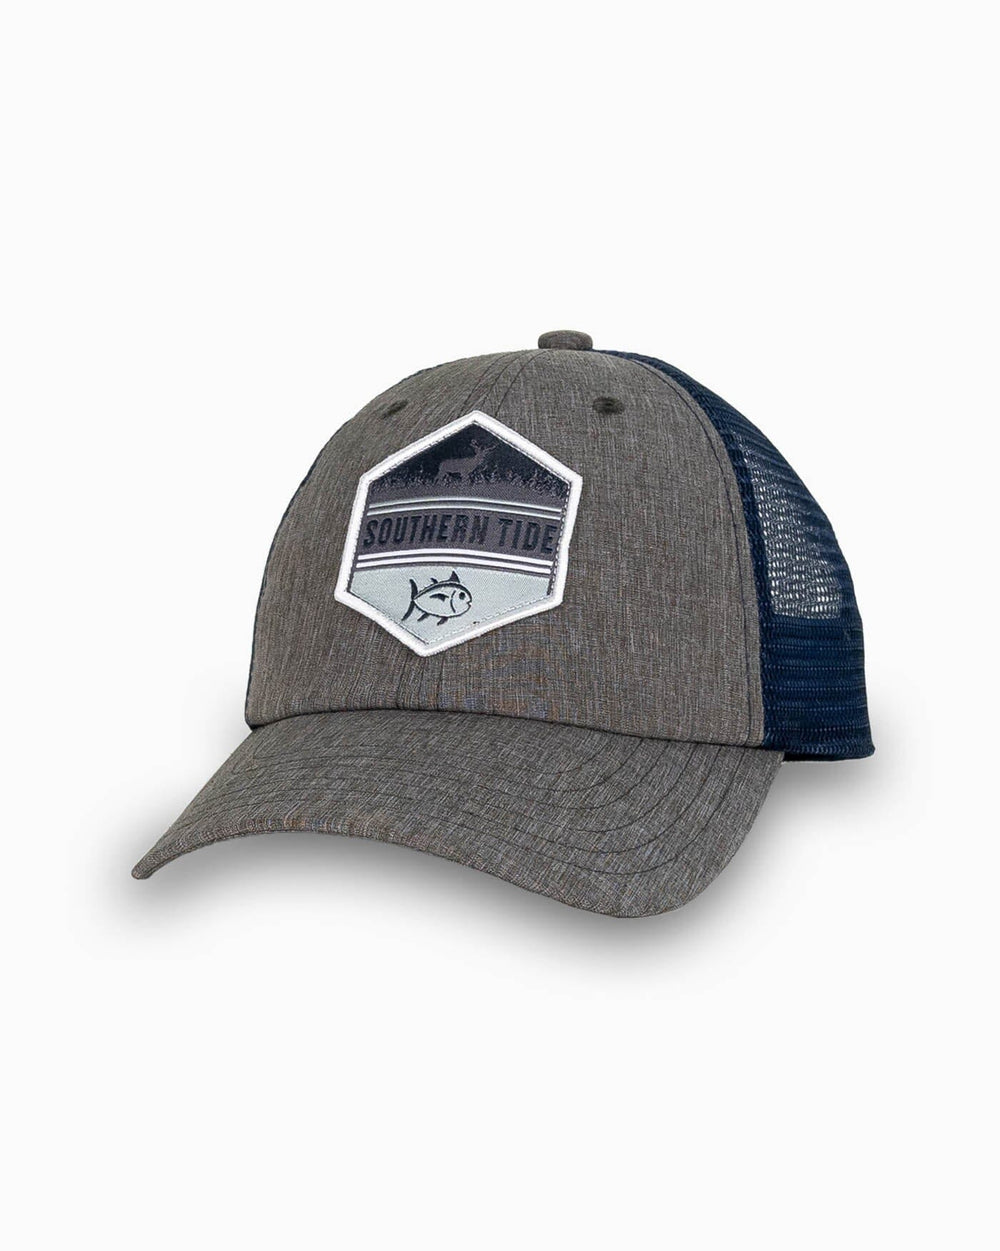 The front view of the Southern Tide Boys ST Deer Hexagon Trucker Hat by Southern Tide - Grey